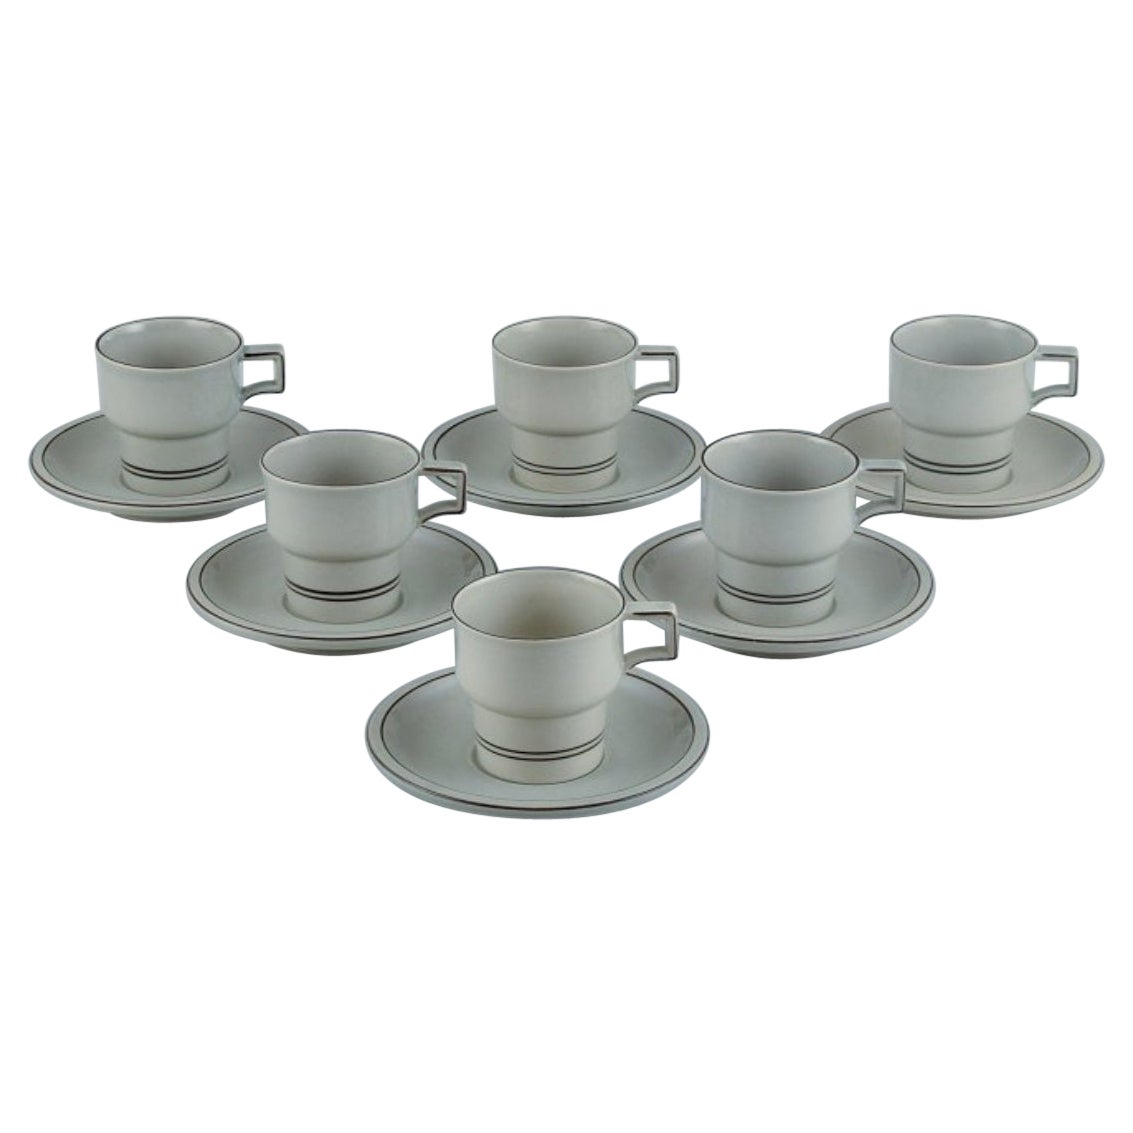 Jens Harald Quistgaard, Bing & Grøndahl. Colombia, six coffee cups with saucers